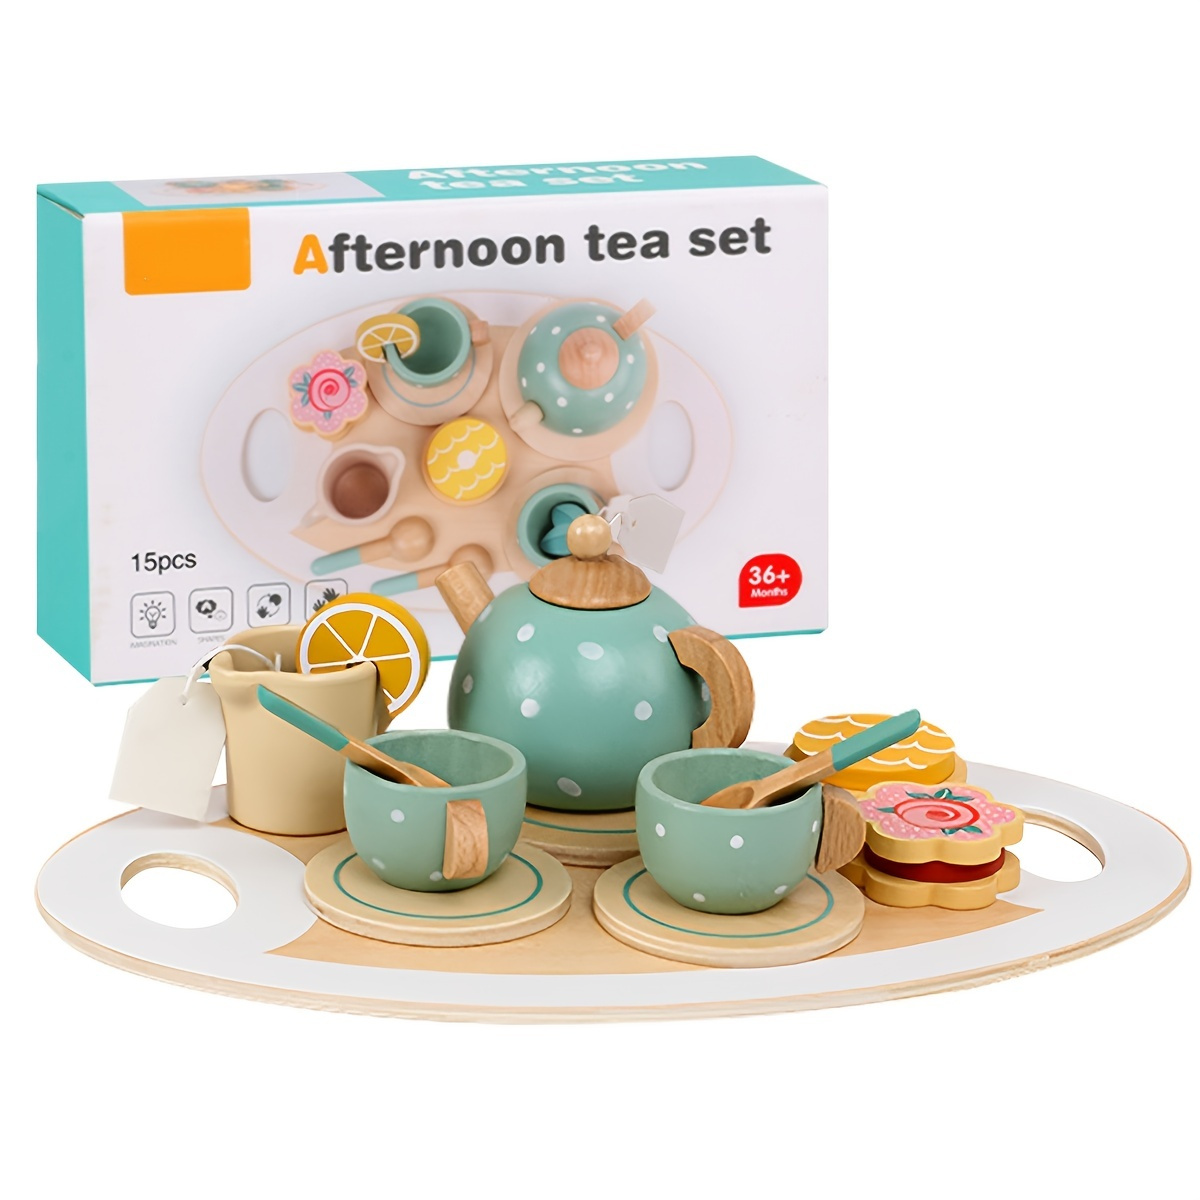 

14pcs Wooden Tea Set - Pretend Play Tea Party Set For Toddlers - Fun Role Play Food & Desserts - Interactive Simulation Teacup Toys For Boys & Girls Halloween Christmas Gift